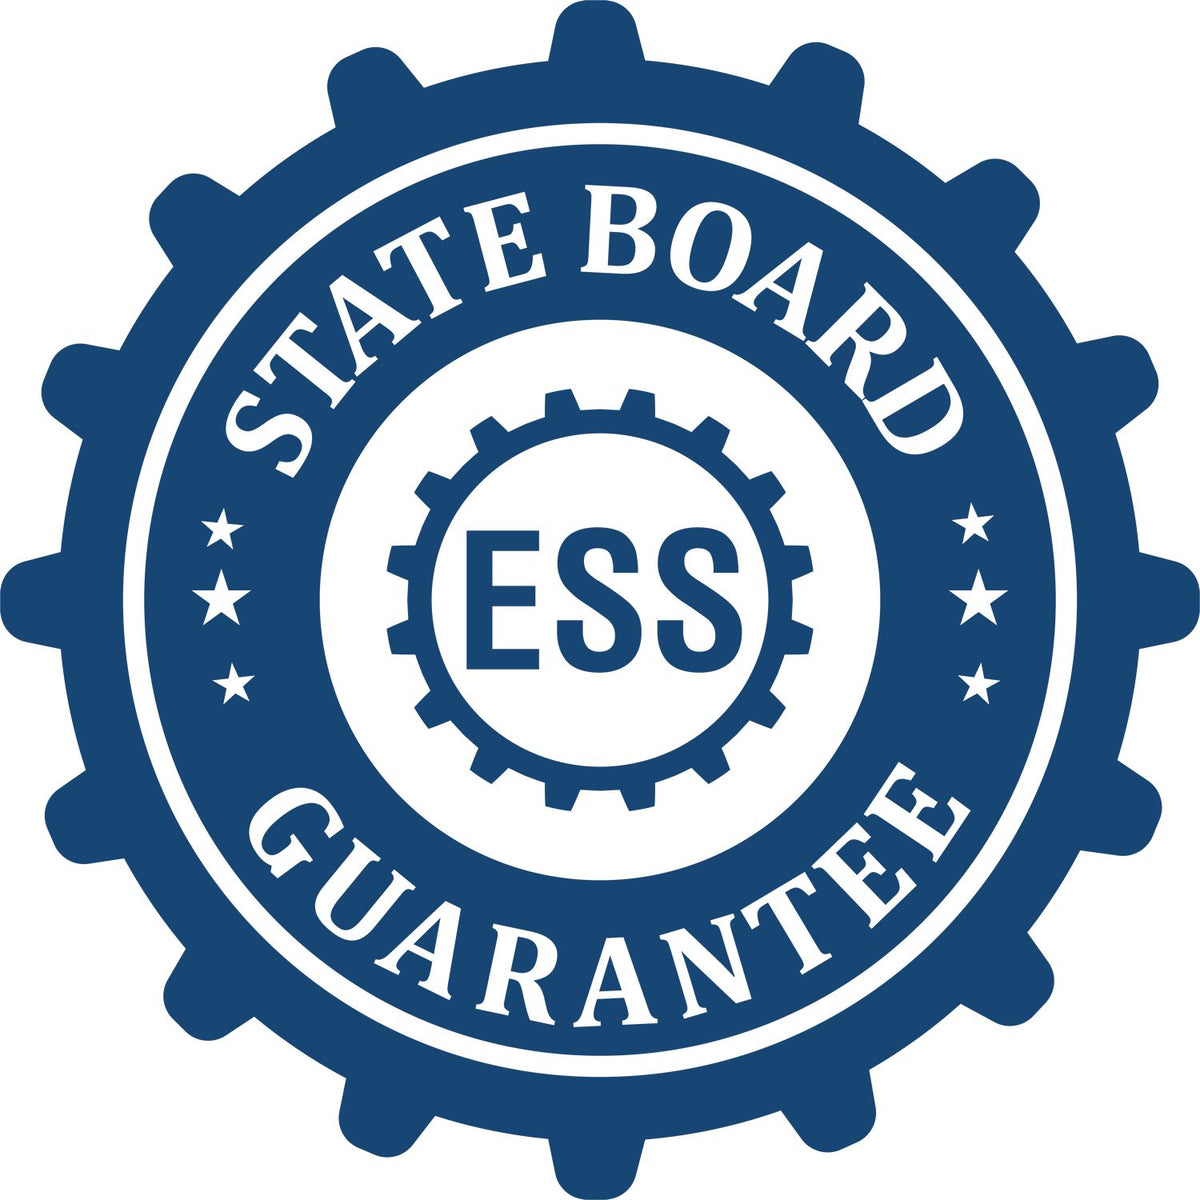 An emblem in a gear shape illustrating a state board guarantee for the Extended Long Reach Arkansas Surveyor Embosser product.